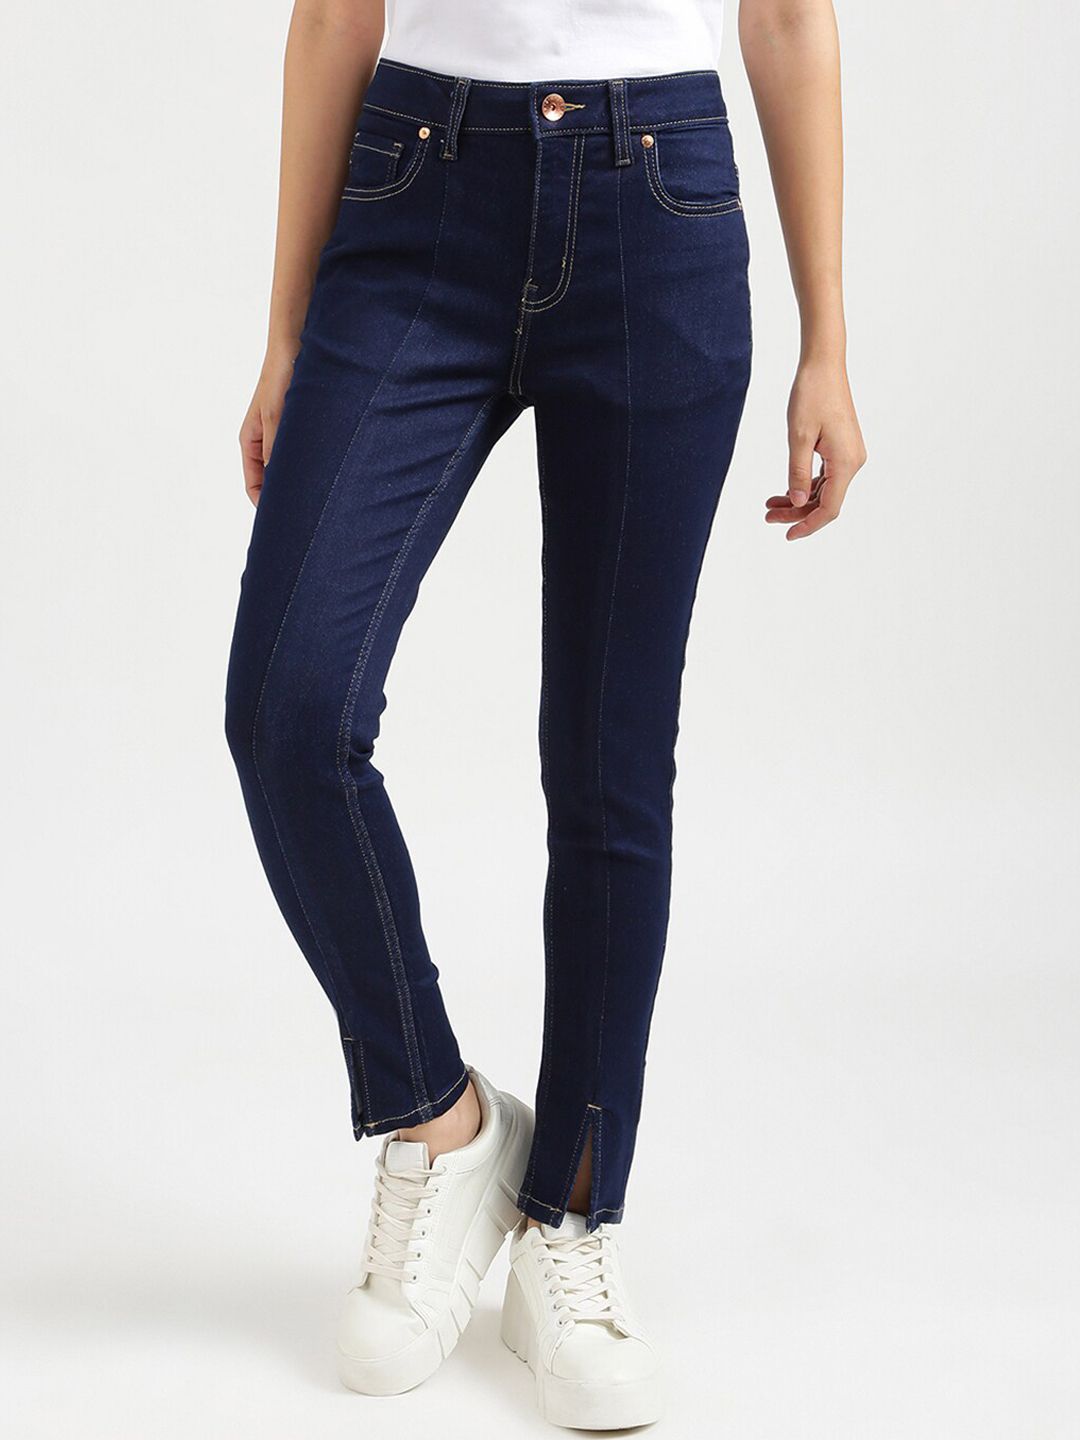 United Colors of Benetton Women Navy Blue Slim Fit Jeans Price in India